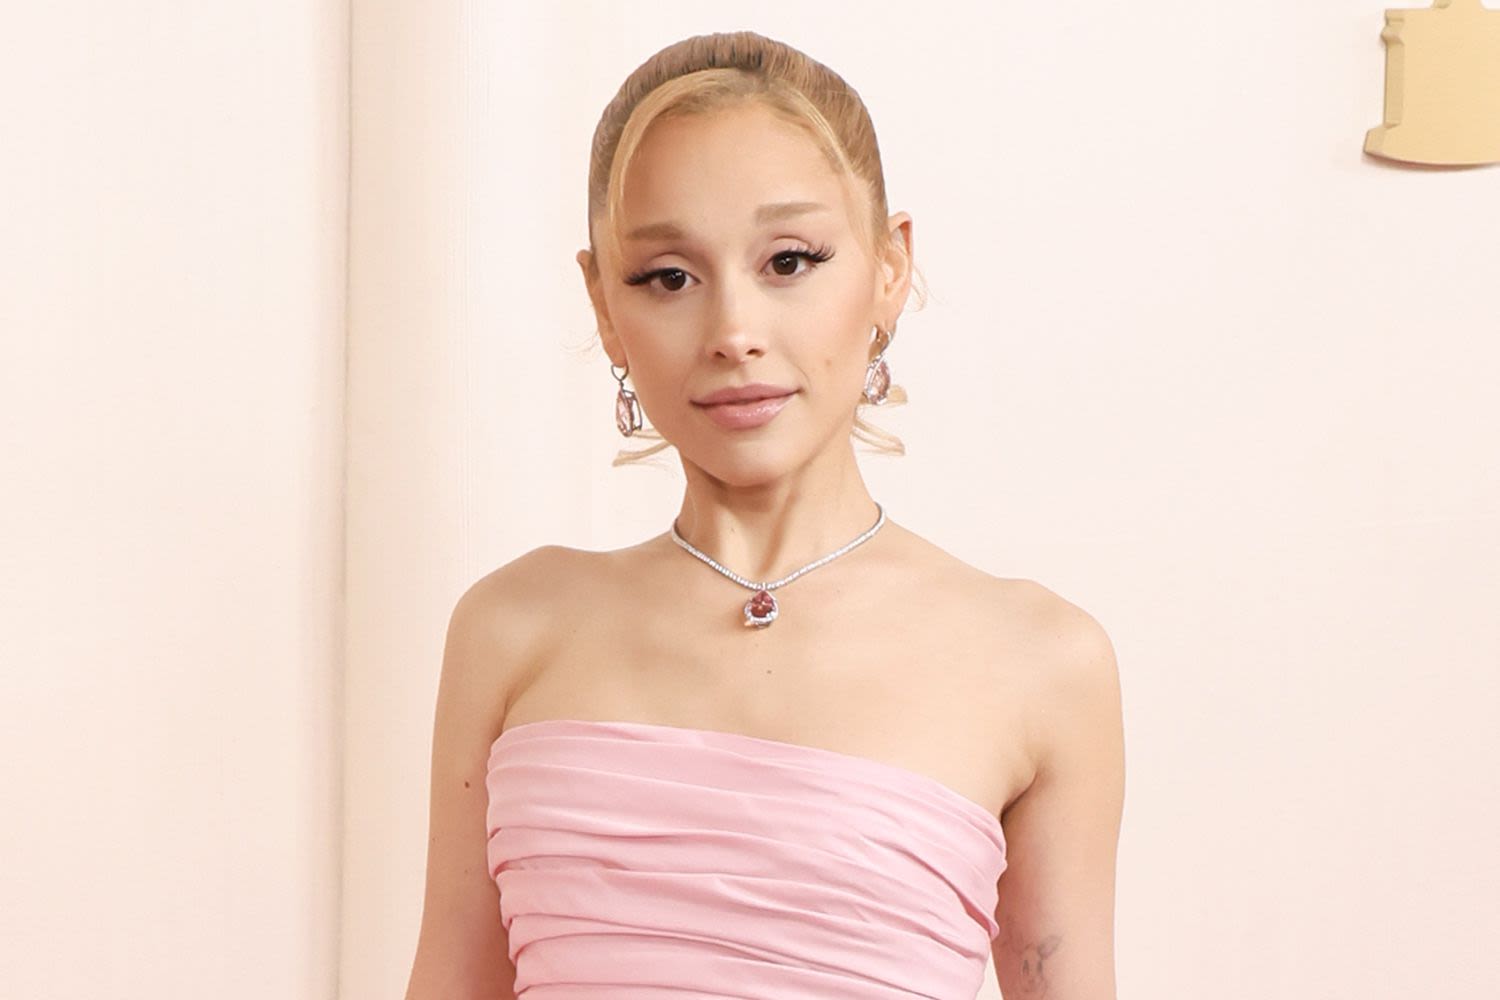 Ariana Grande Once Told a Young Fan Her Dream Dinner Date Would Be with Jeffrey Dahmer: 'I Have Questions'